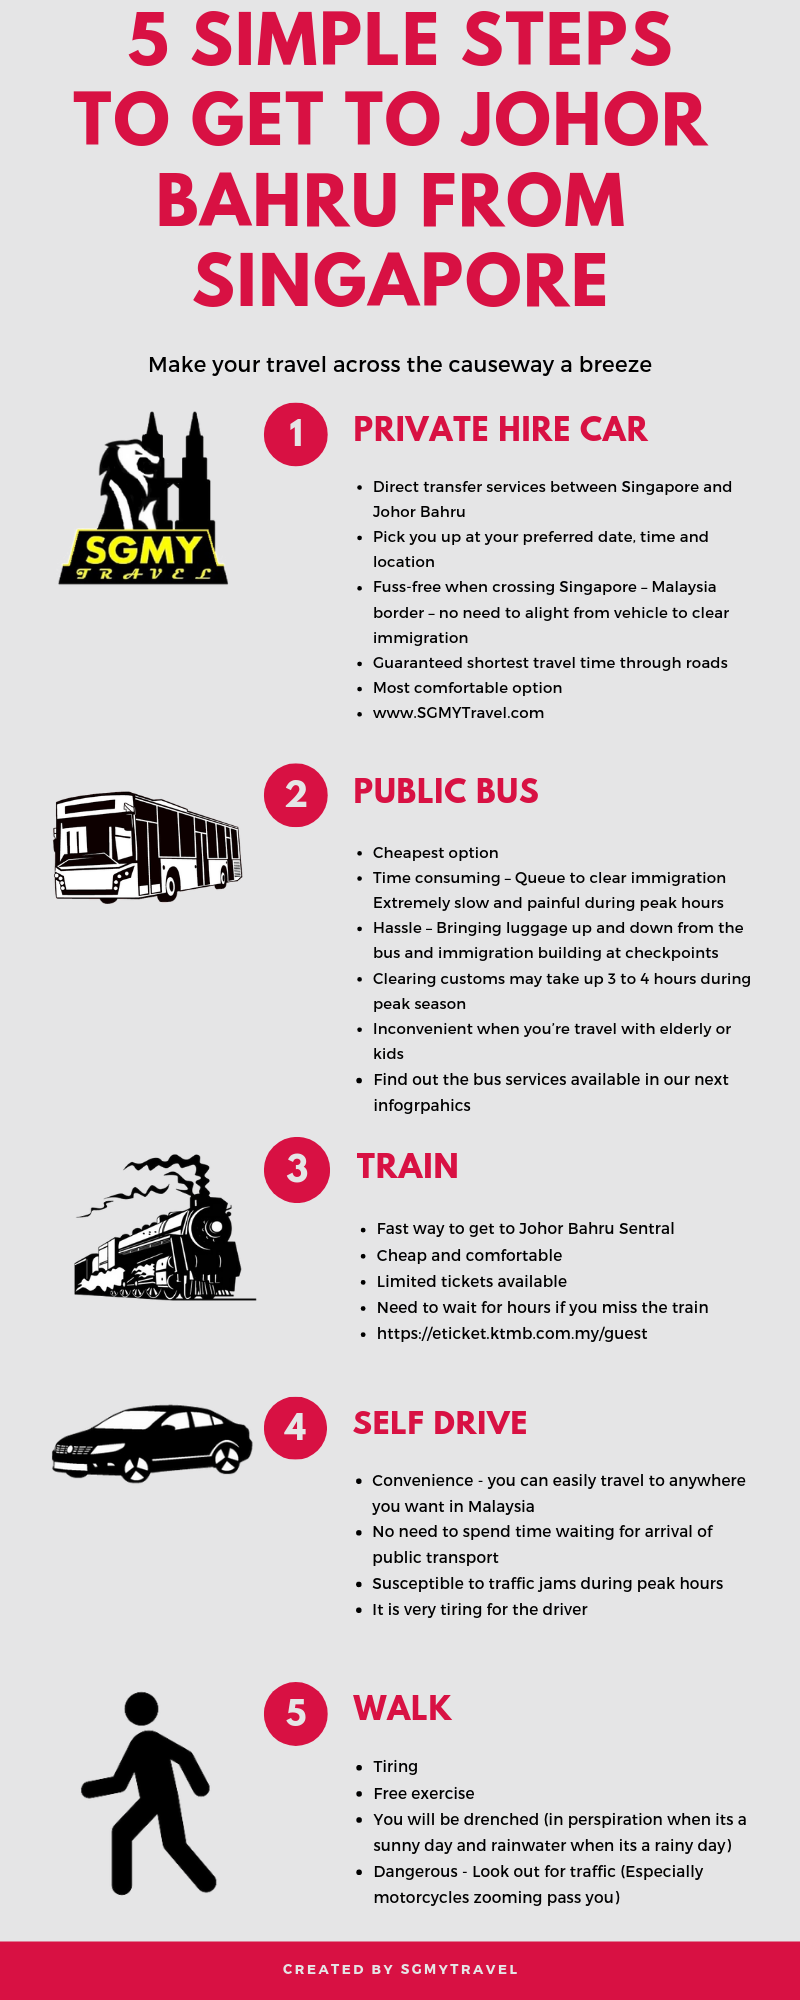 5 ways to get to JB from Singapore